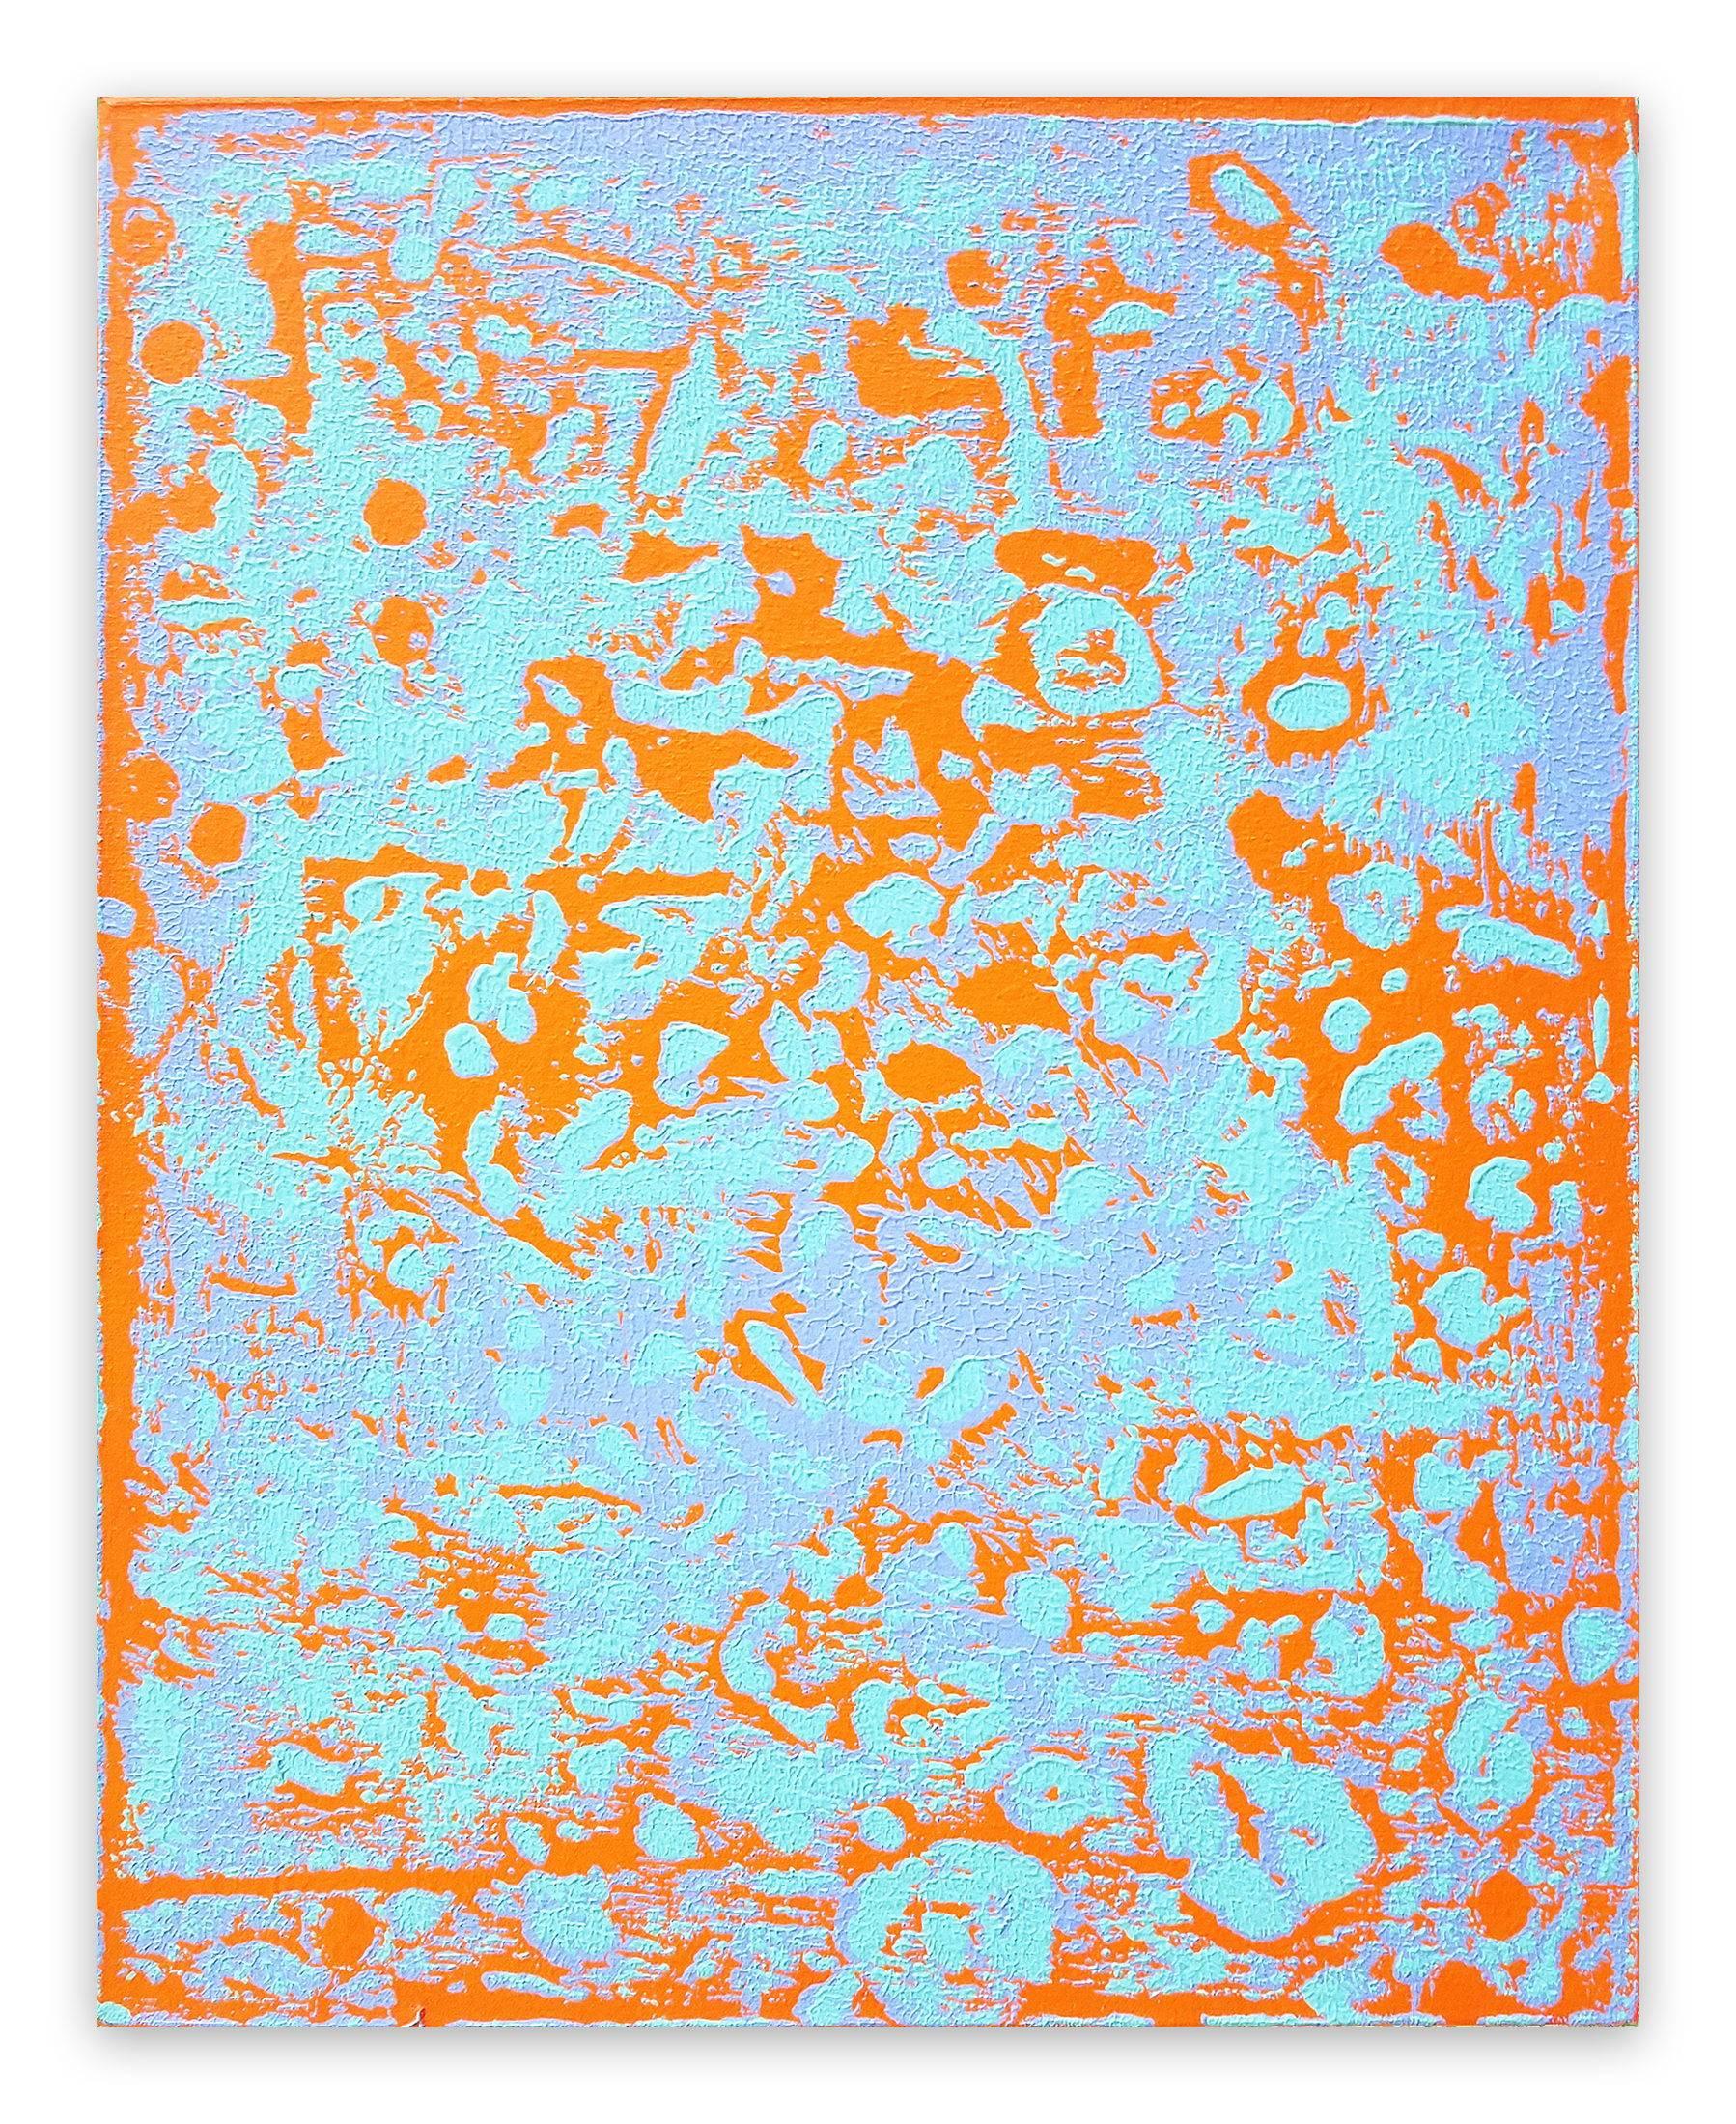 P15 - 1028 (Abstract Painting)

Acrylic on canvas.

In a process closely akin to relief printmaking, Maine uses textured surfaces to apply fluid acrylic paint indirectly to prepared canvas. He makes these surfaces or “plates,” some of which are